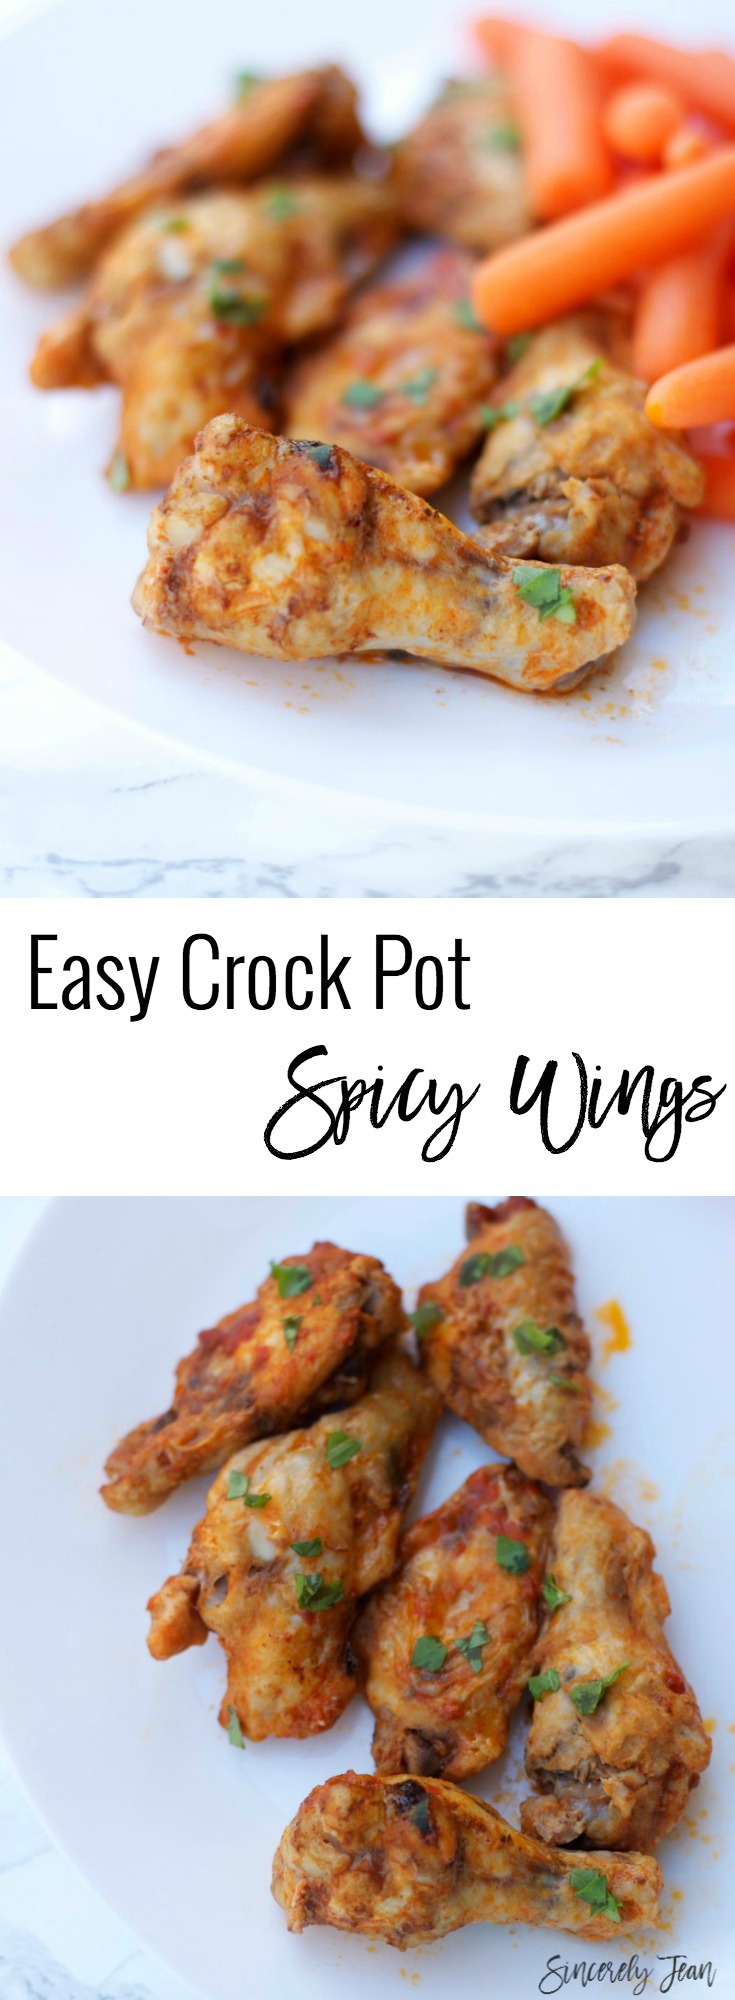 SincerelyJean.com brings you another simple recipe! This one is perfect for any party, especially the superbowl! Crock Pot hot wings